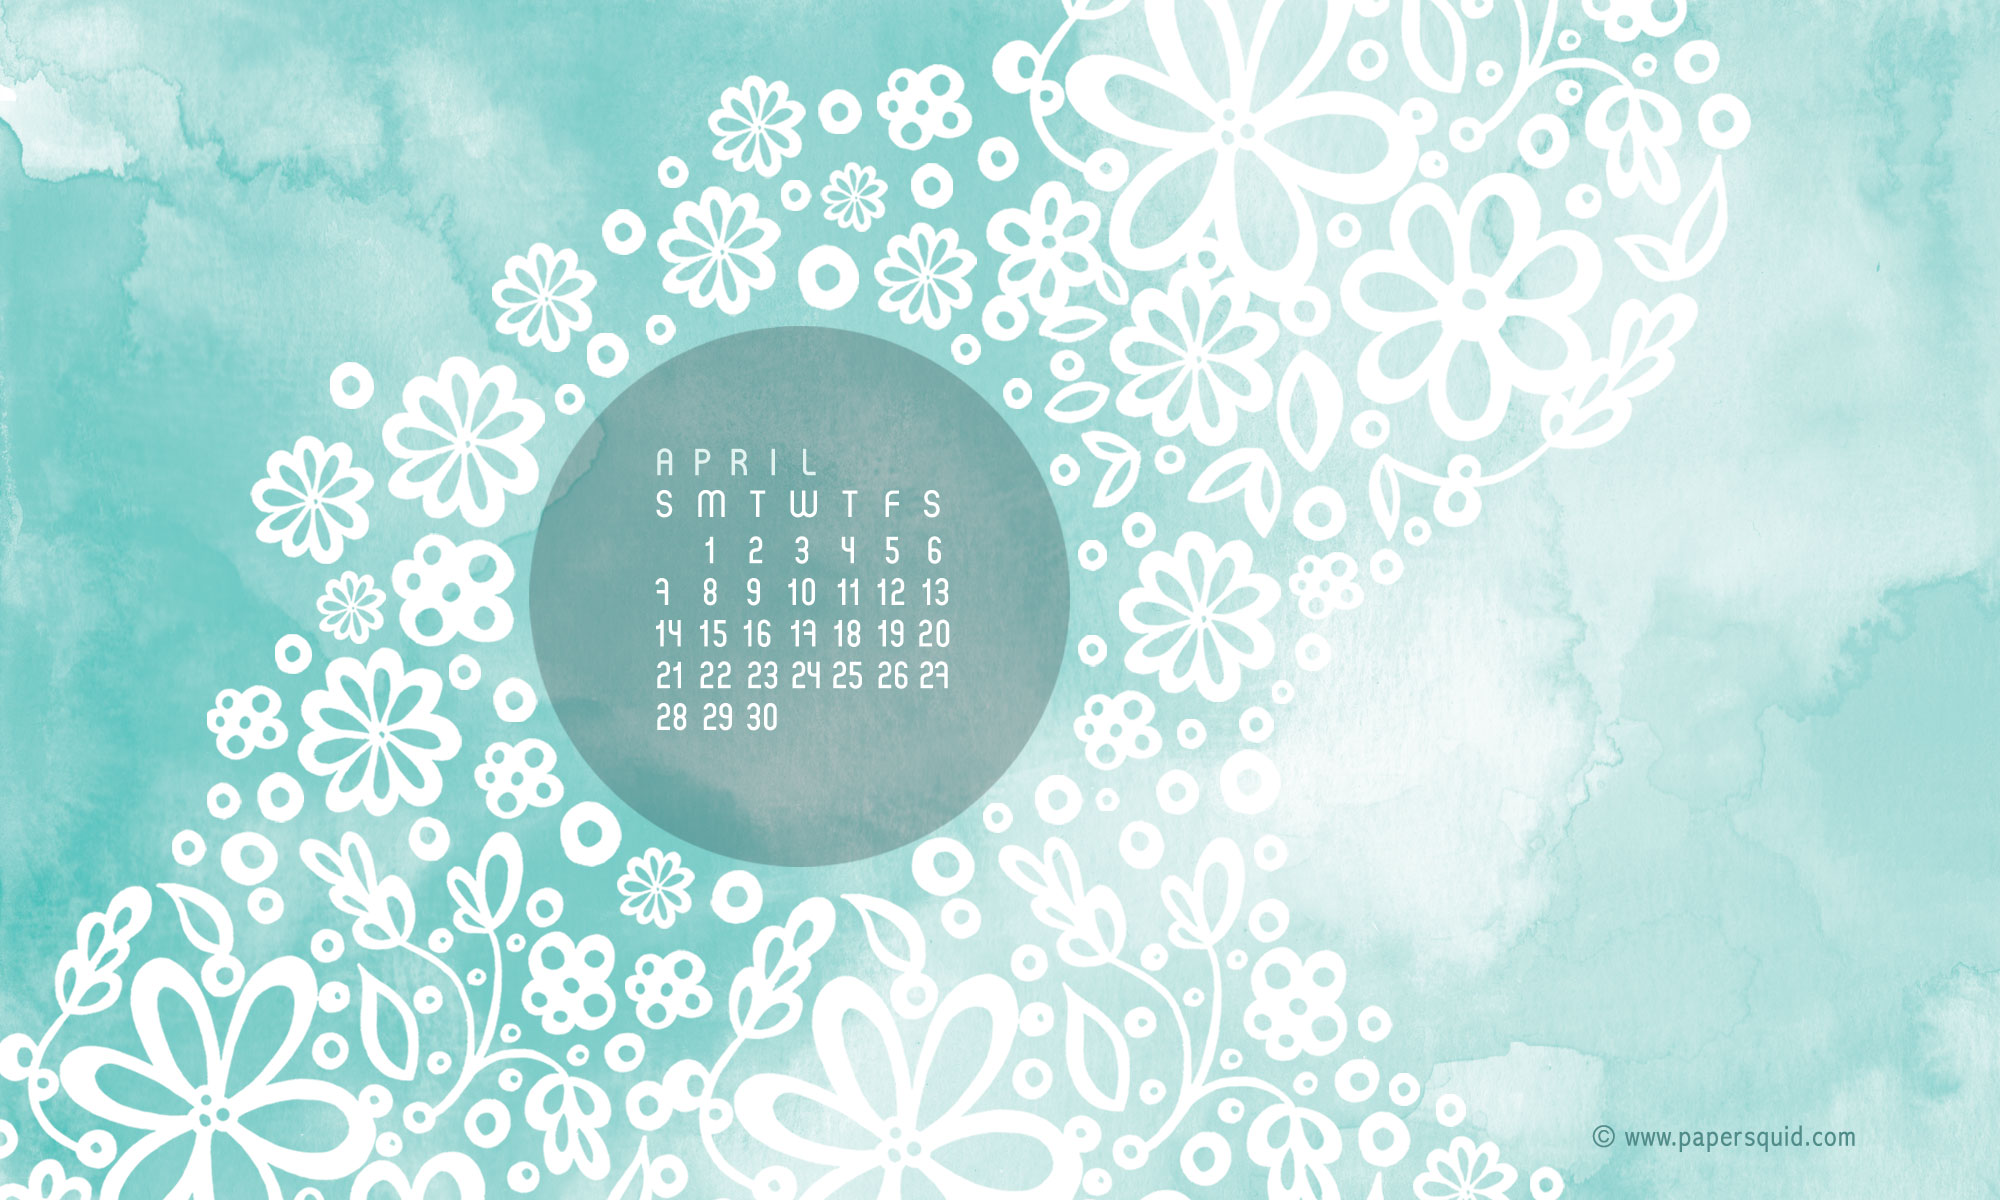  Here is Aprils free desktop calendar which you can download here